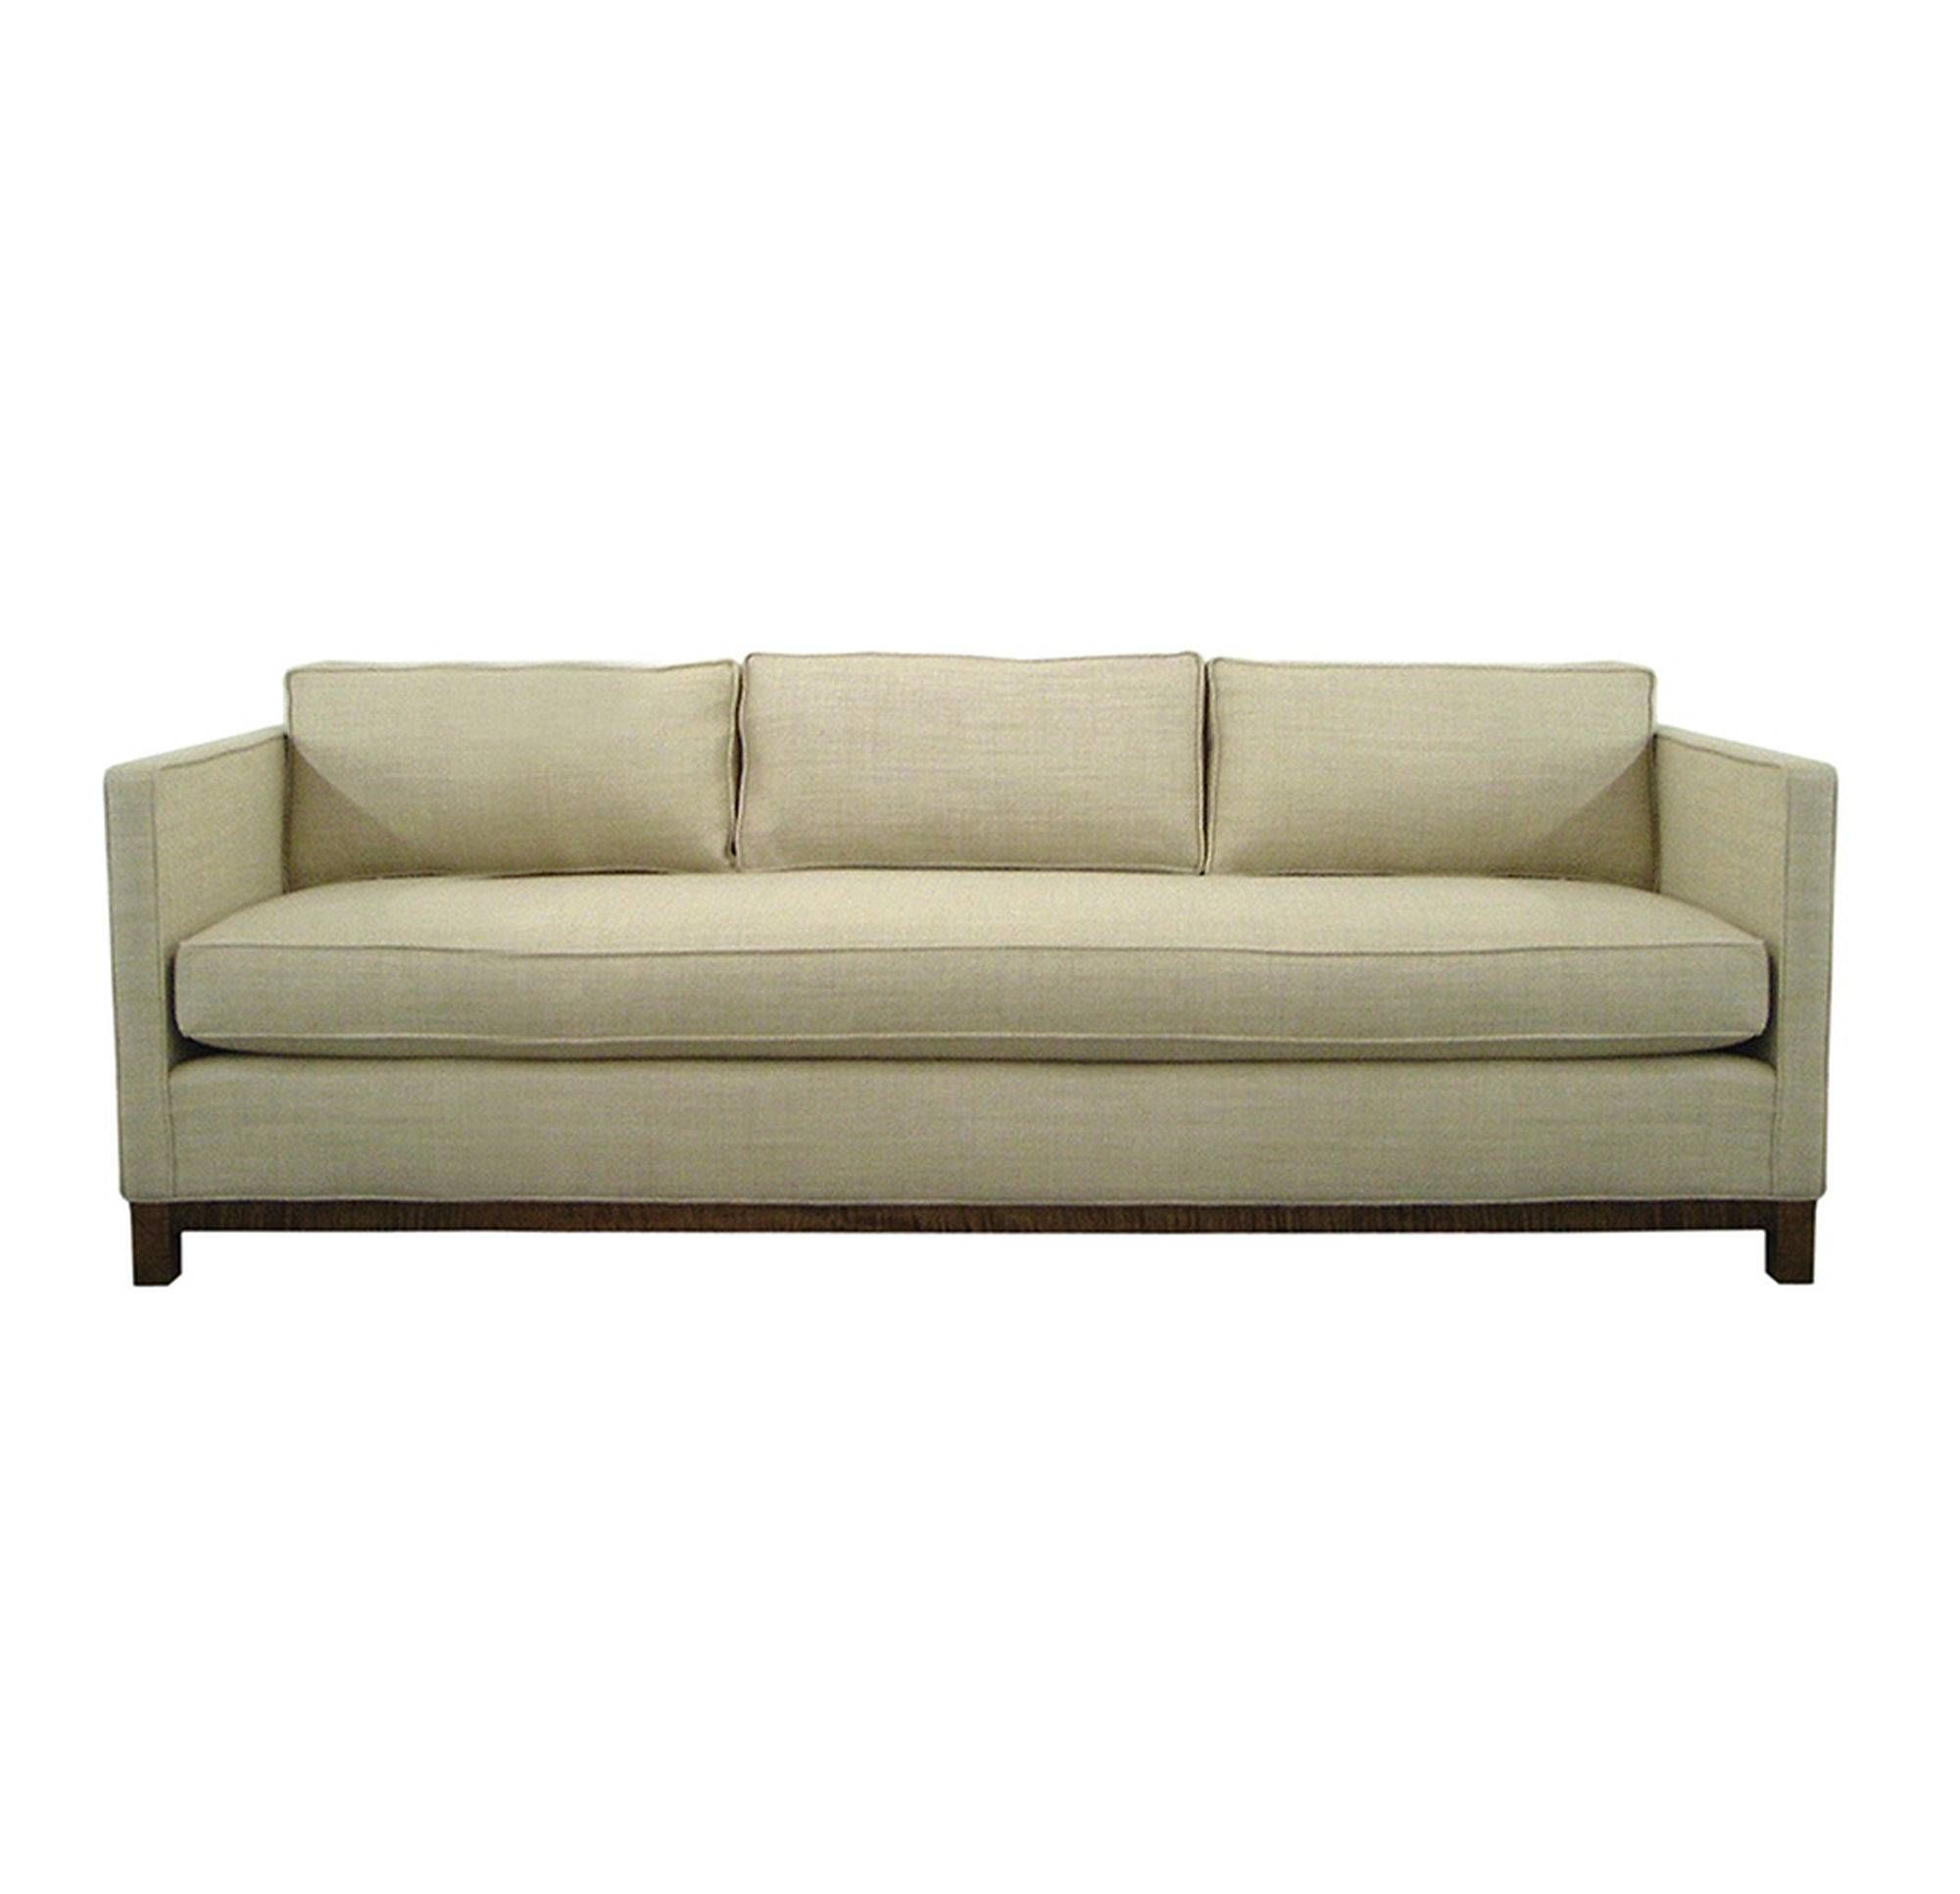 Mitchell Gold Clifton Sectional Sofa – Cleanupflorida Regarding Mitchell Gold Clifton Sectional Sofas (View 3 of 15)